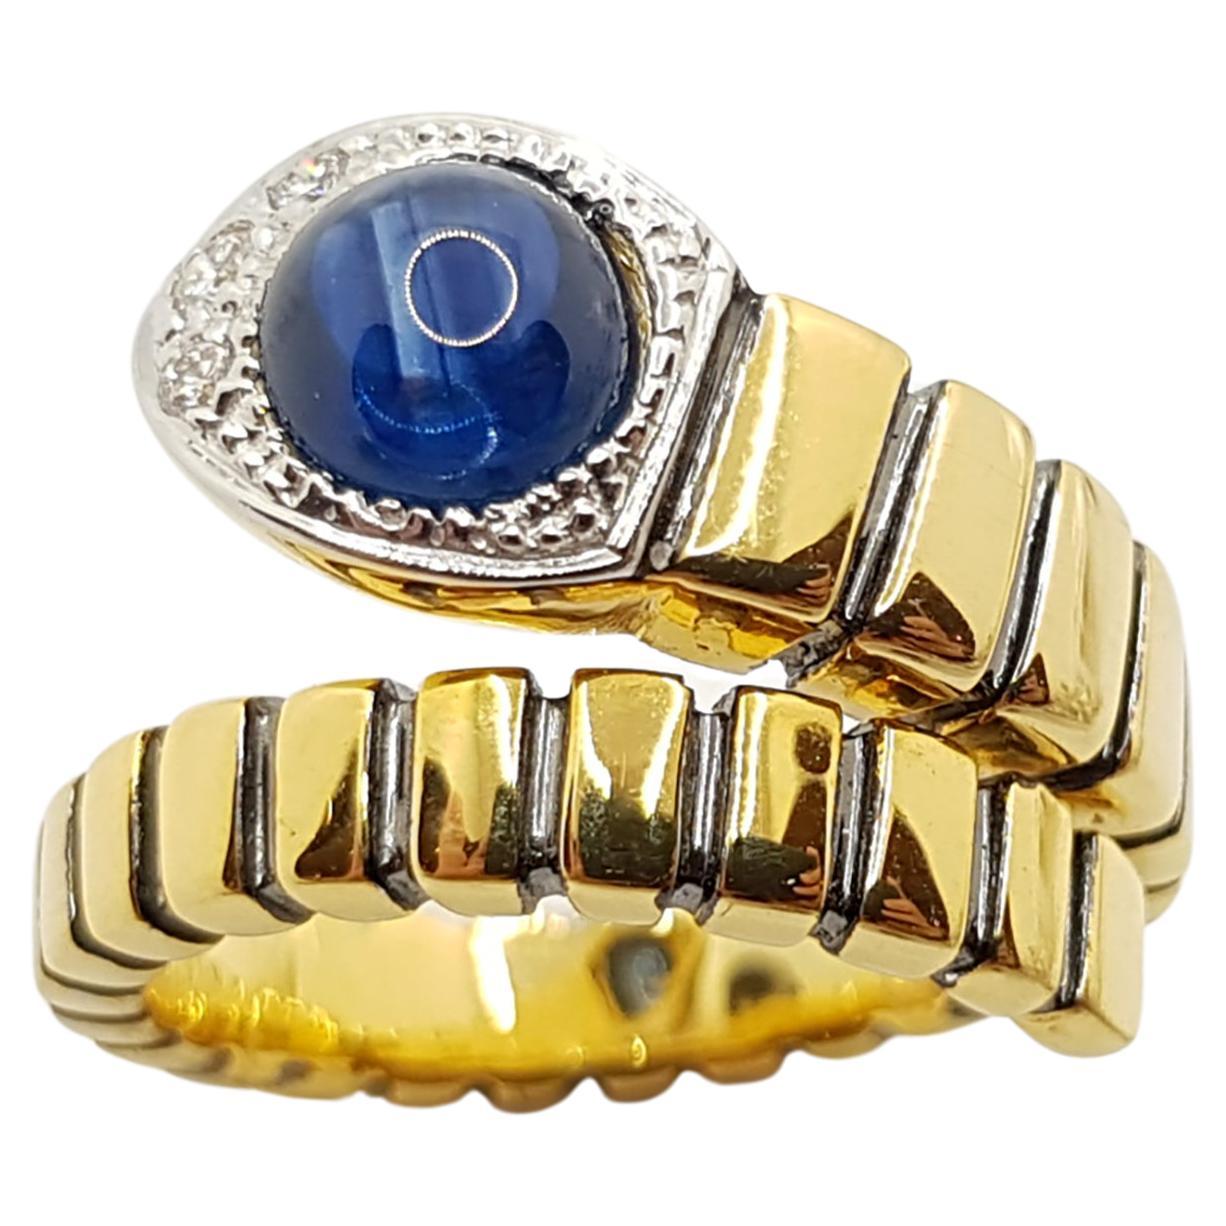 Cabochon Blue Sapphire with Diamond Serpent Ring Set in 18 Karat Gold Settings